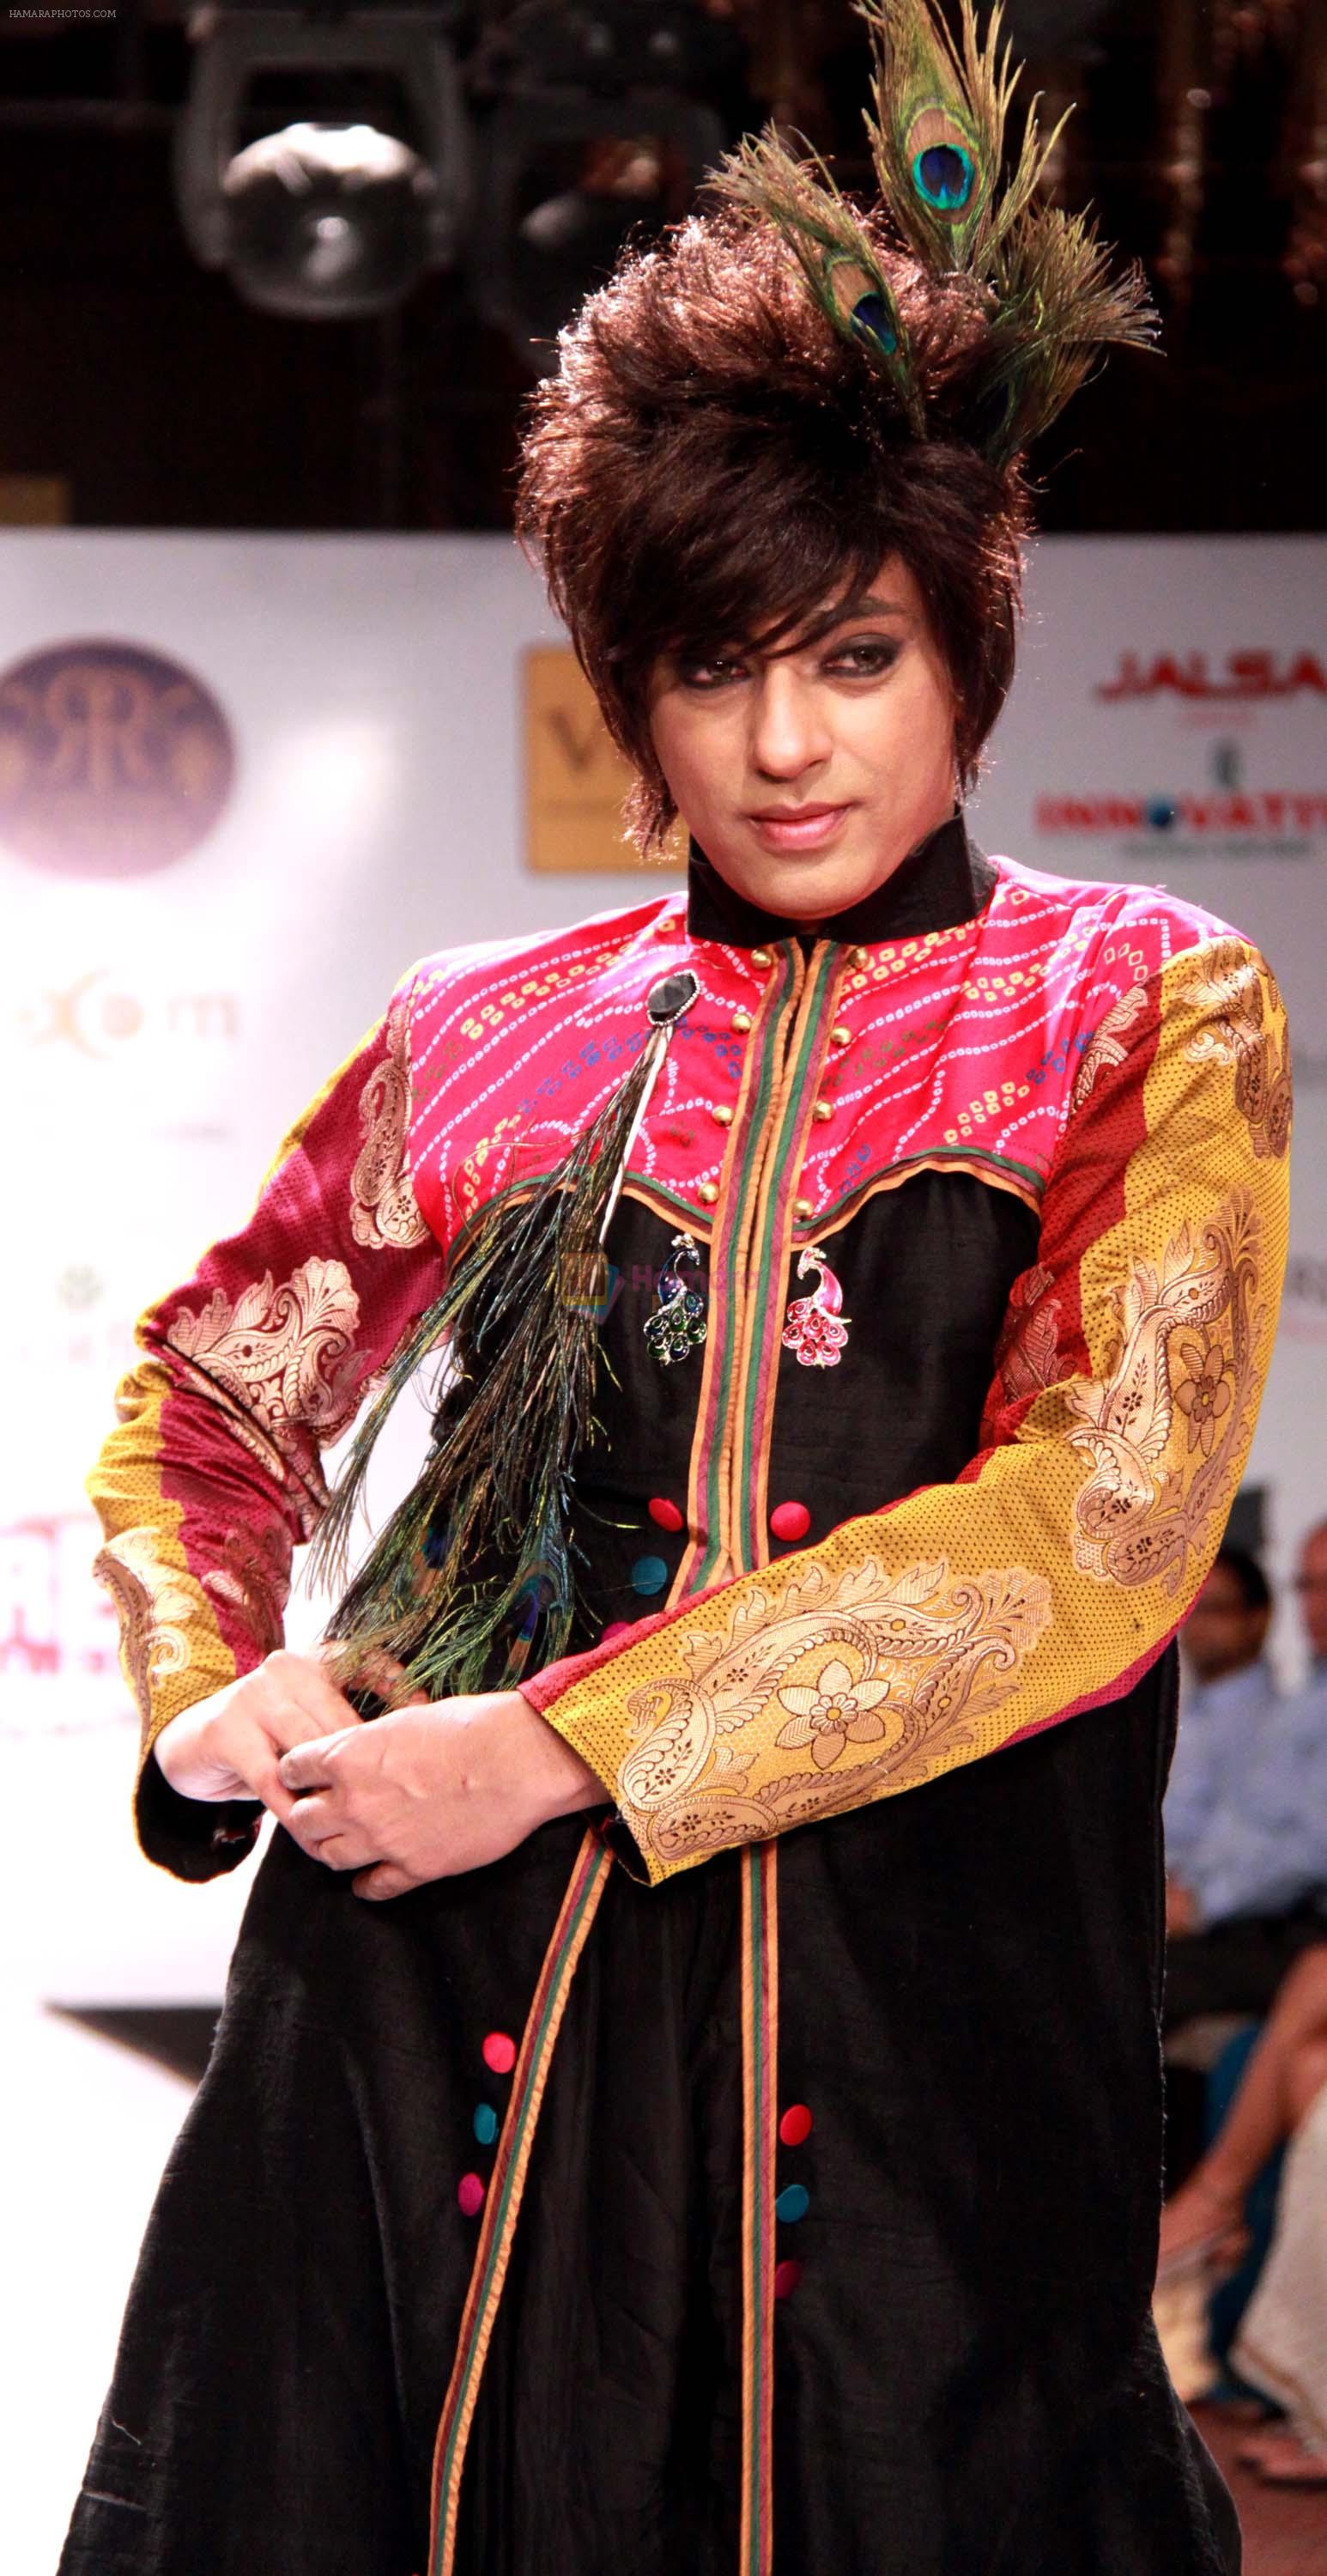 rohit verma on second day of Rajasthan Fashion Week at Jaipur Marriott on 25th May 2012